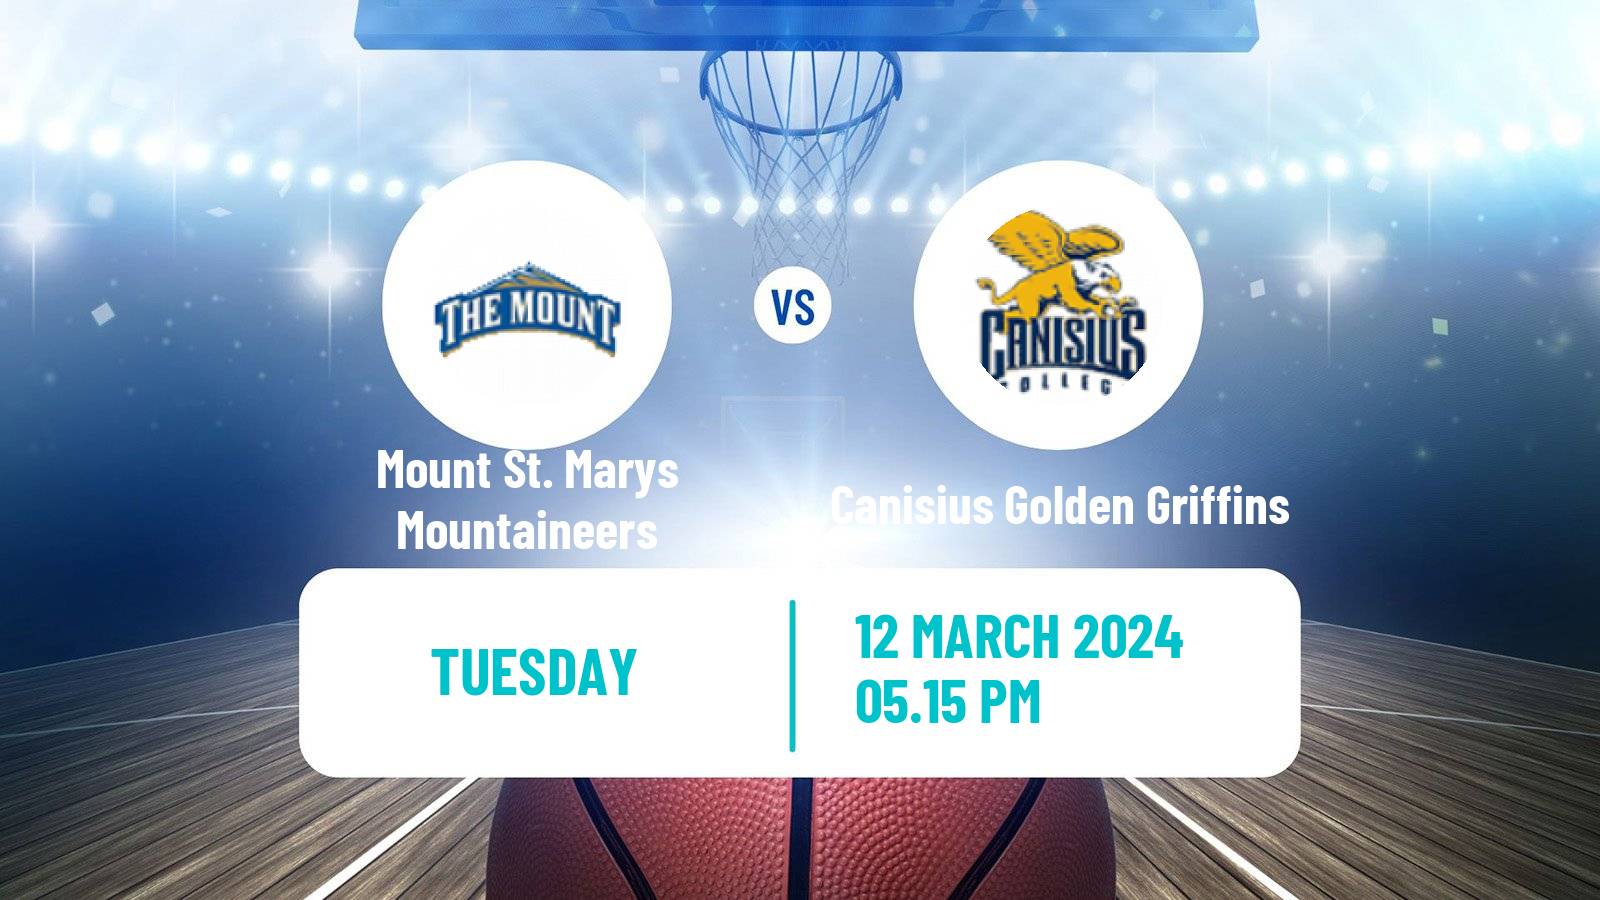 Basketball NCAA College Basketball Mount St. Marys Mountaineers - Canisius Golden Griffins